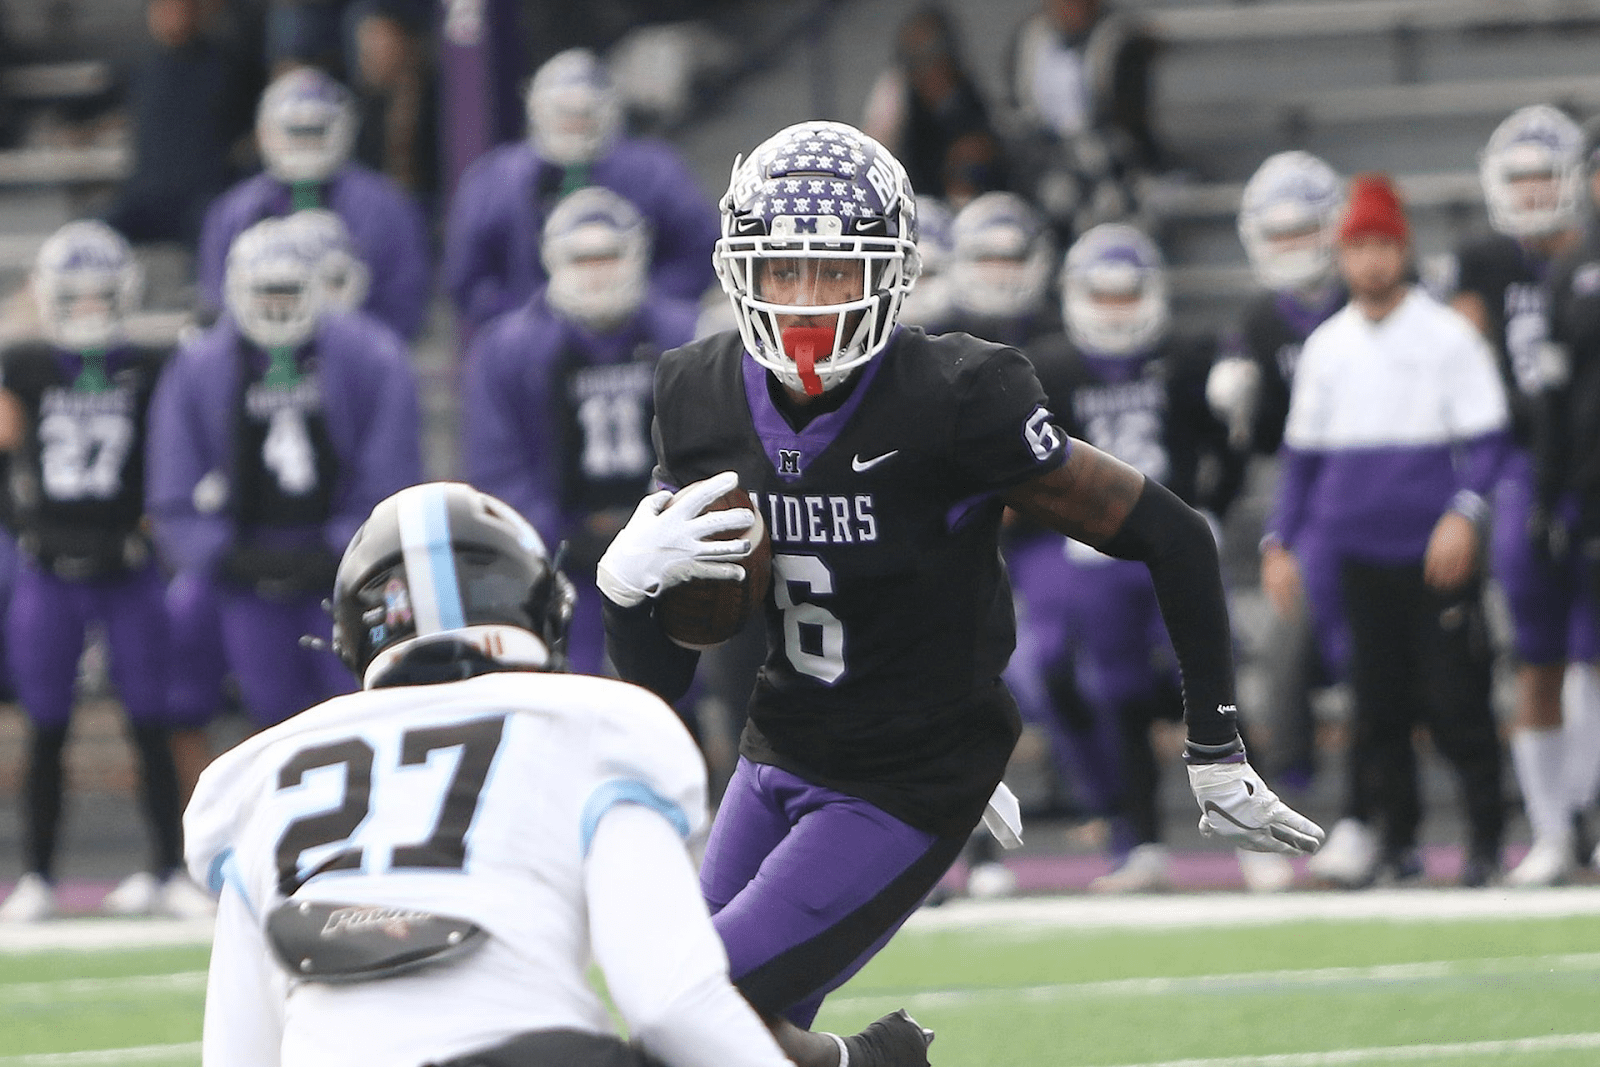 Mount Union WR Wayne Ruby is highly considered to be one of the top Division 3 prospects this season. With 4500 career receiving yards, Ruby has redeemable qualities which pro scouts have been keeping tabs on for a while. Senior Hula Bowl scout Mike Bey breaks down Neville as an NFL Prospect in his report.